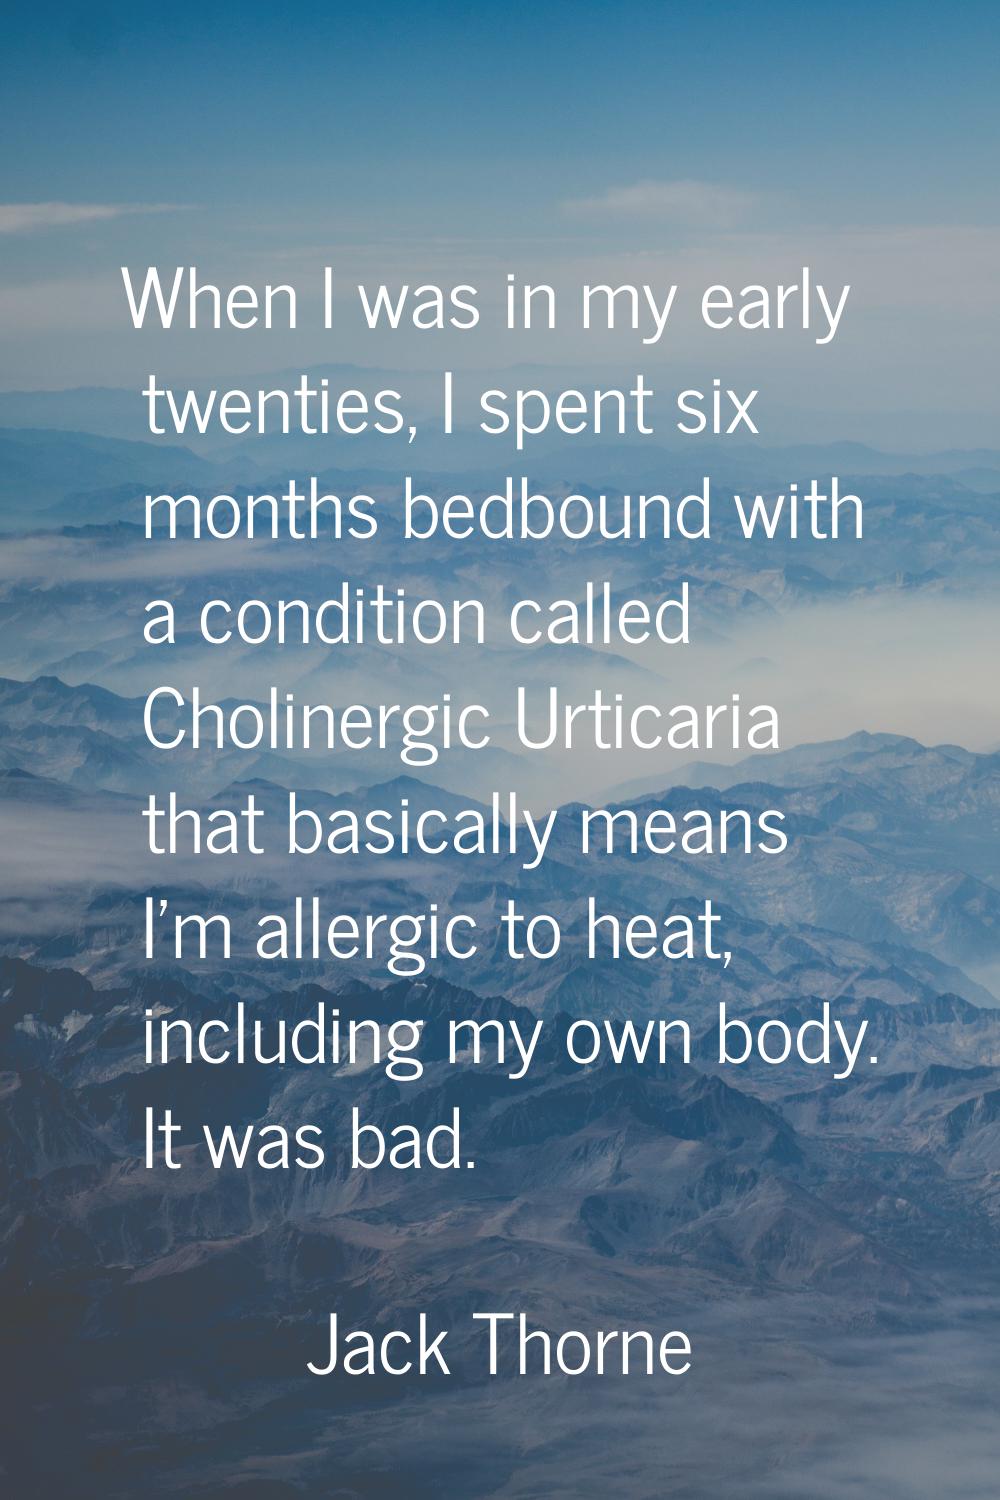 When I was in my early twenties, I spent six months bedbound with a condition called Cholinergic Ur